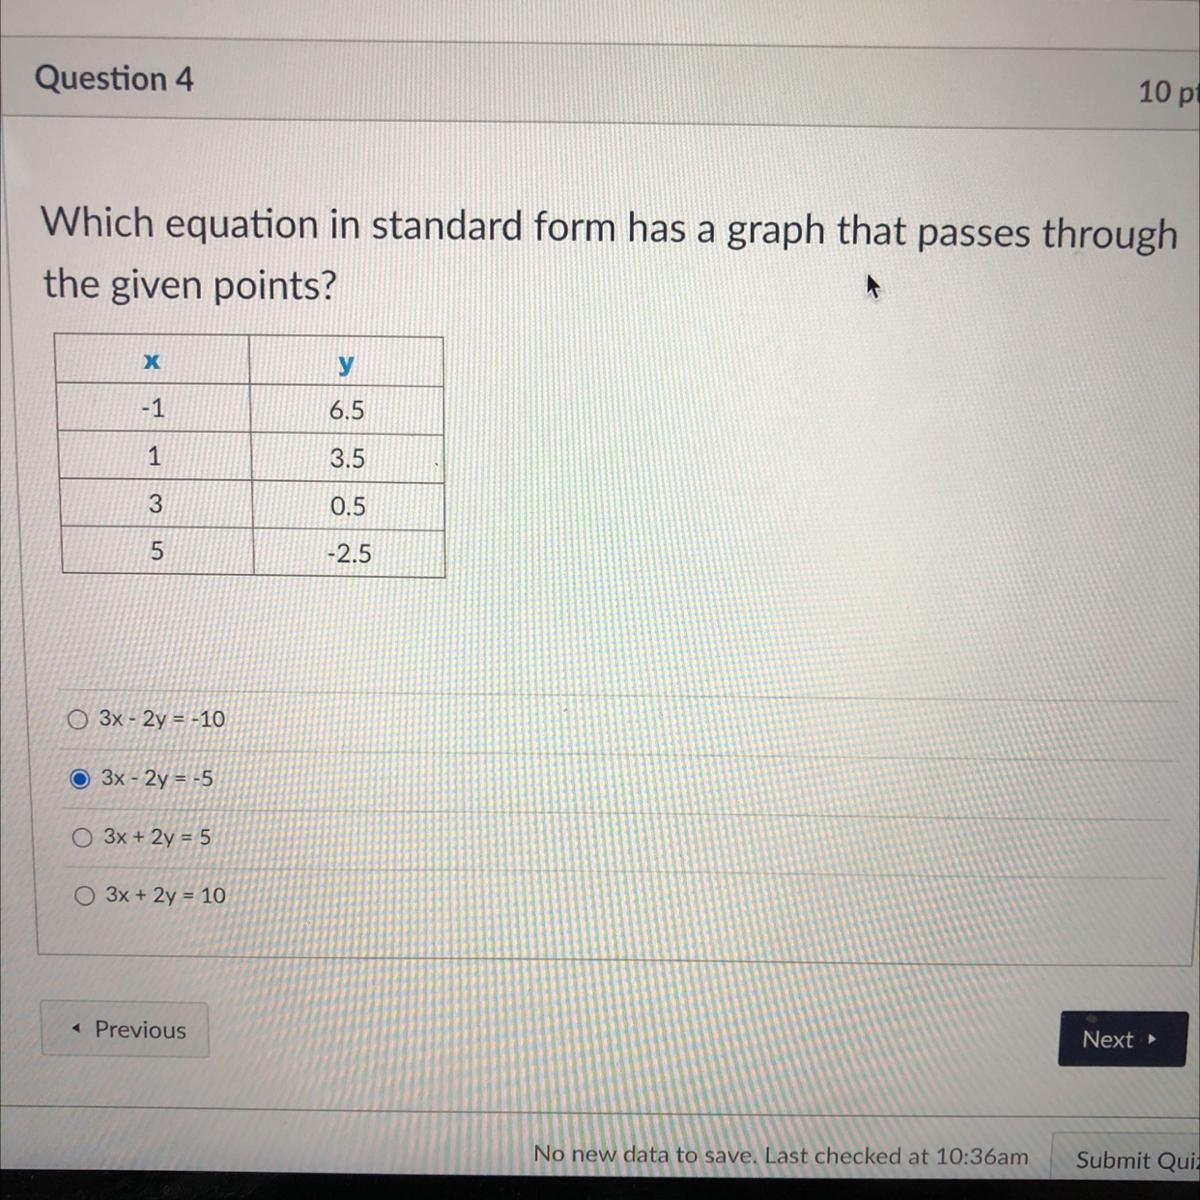 Does Anyone Know The Answer? Its Due In An Hour PLEASE HELPPP!!